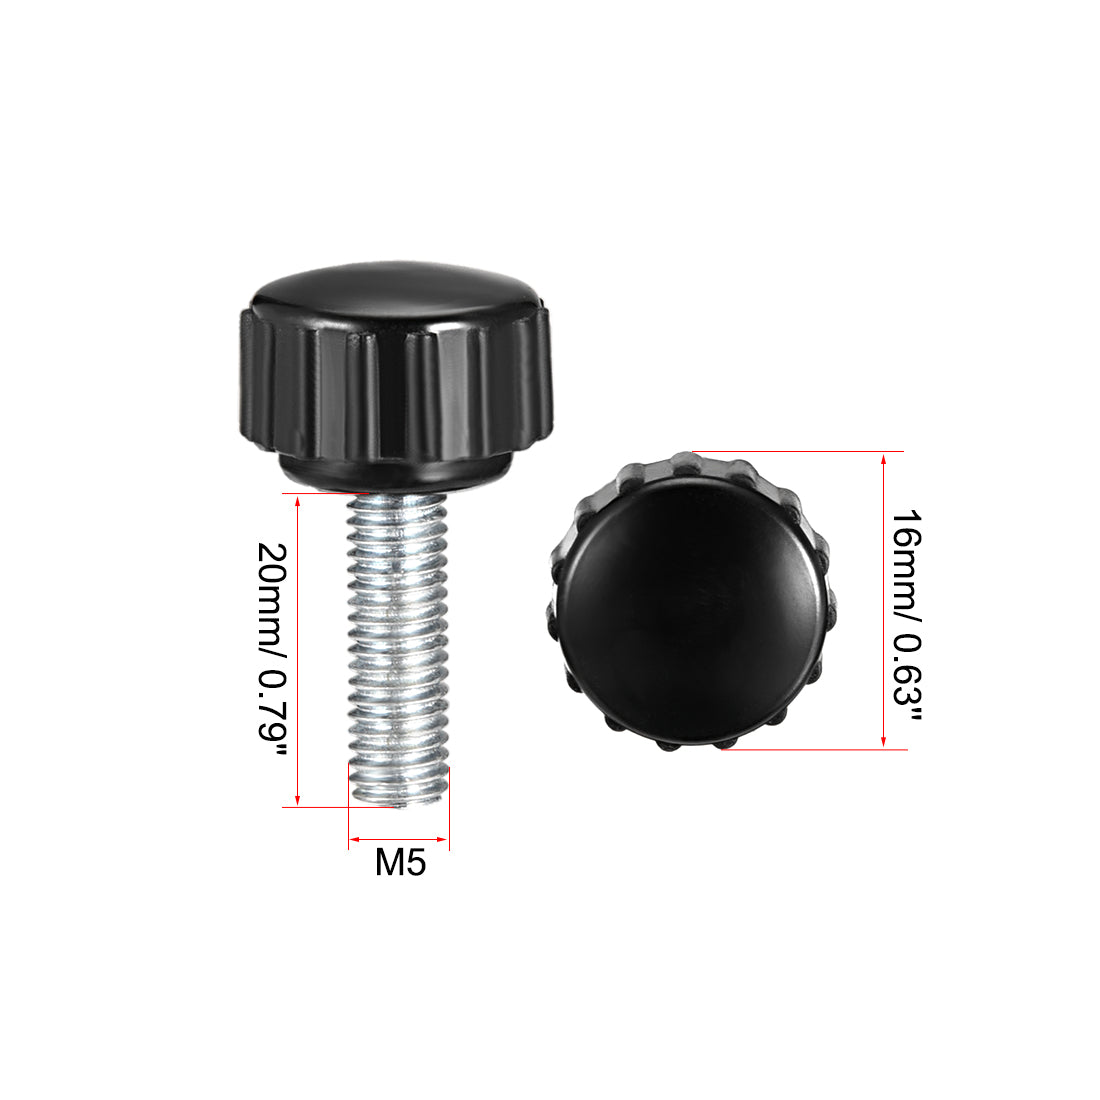 Uxcell Uxcell M5 x 25mm Male Thread Knurled Clamping Knobs Grip Thumb Screw on Type 2 Pcs